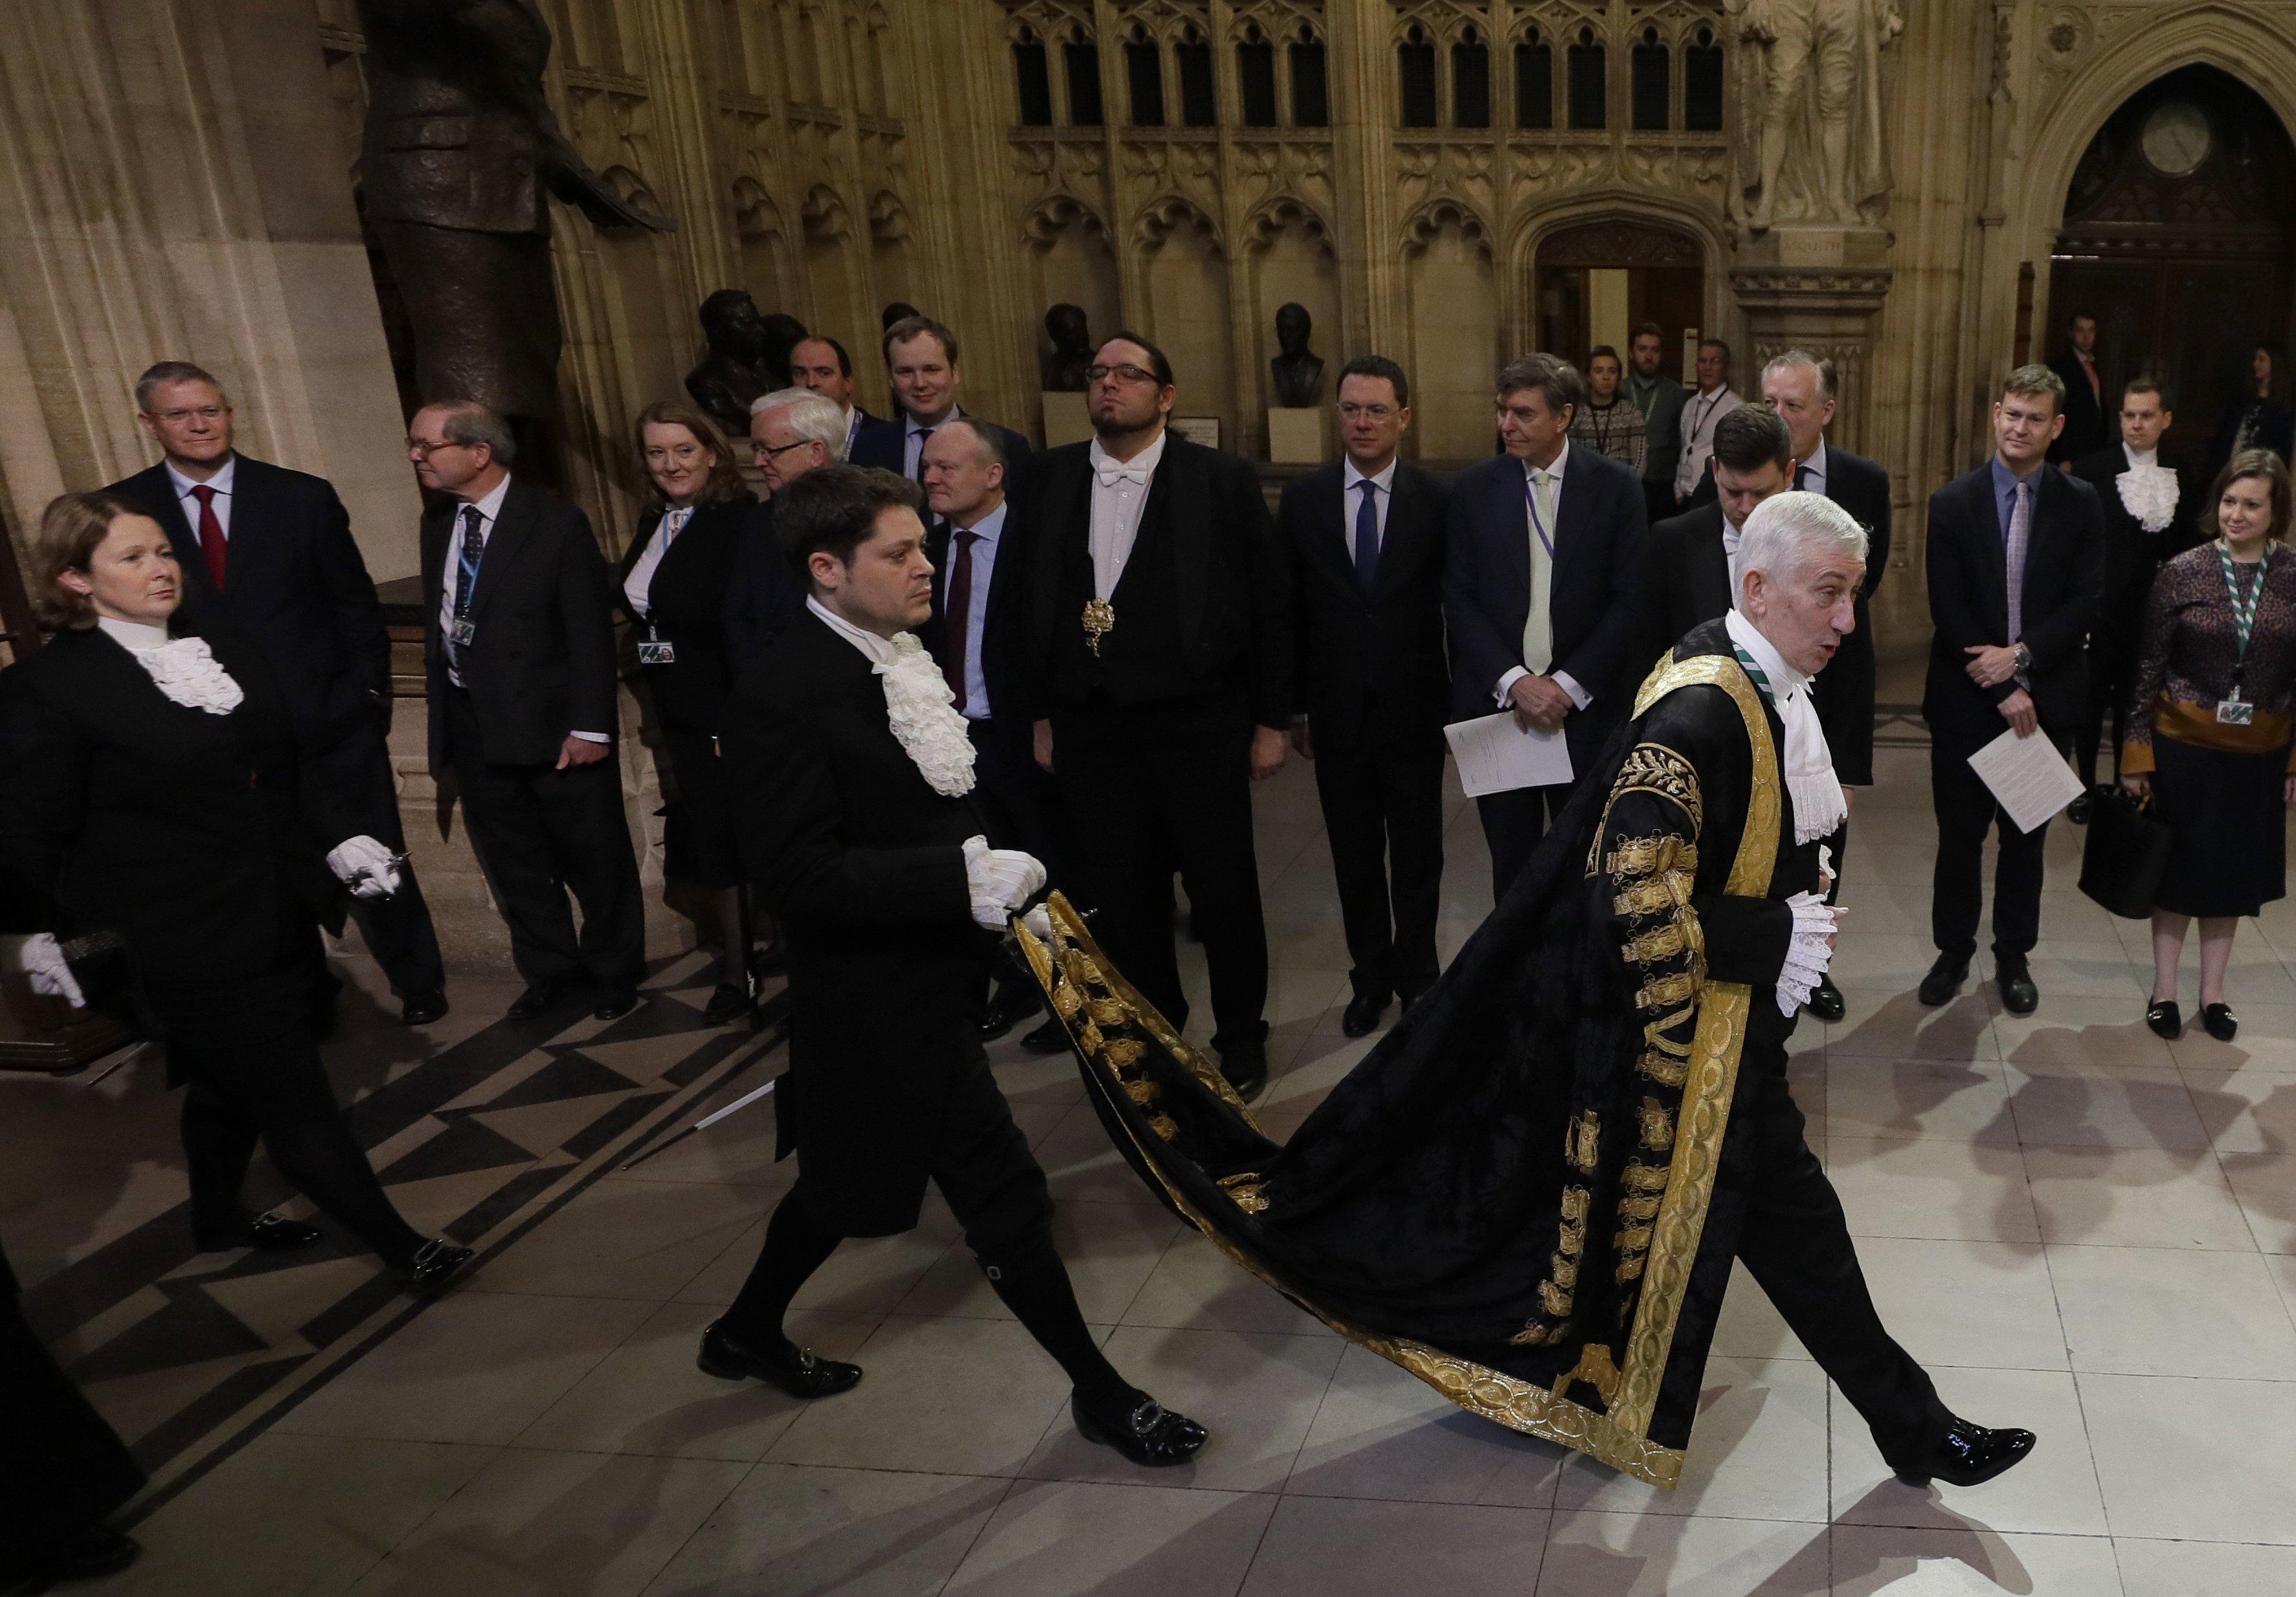 Speaker of The House of Commons Sir Lindsay Hoyle walks through the Members' Lobby in the House of Commons during the State Opening of Parliament by Queen Elizabeth II, at the Palace of Westminster in London.